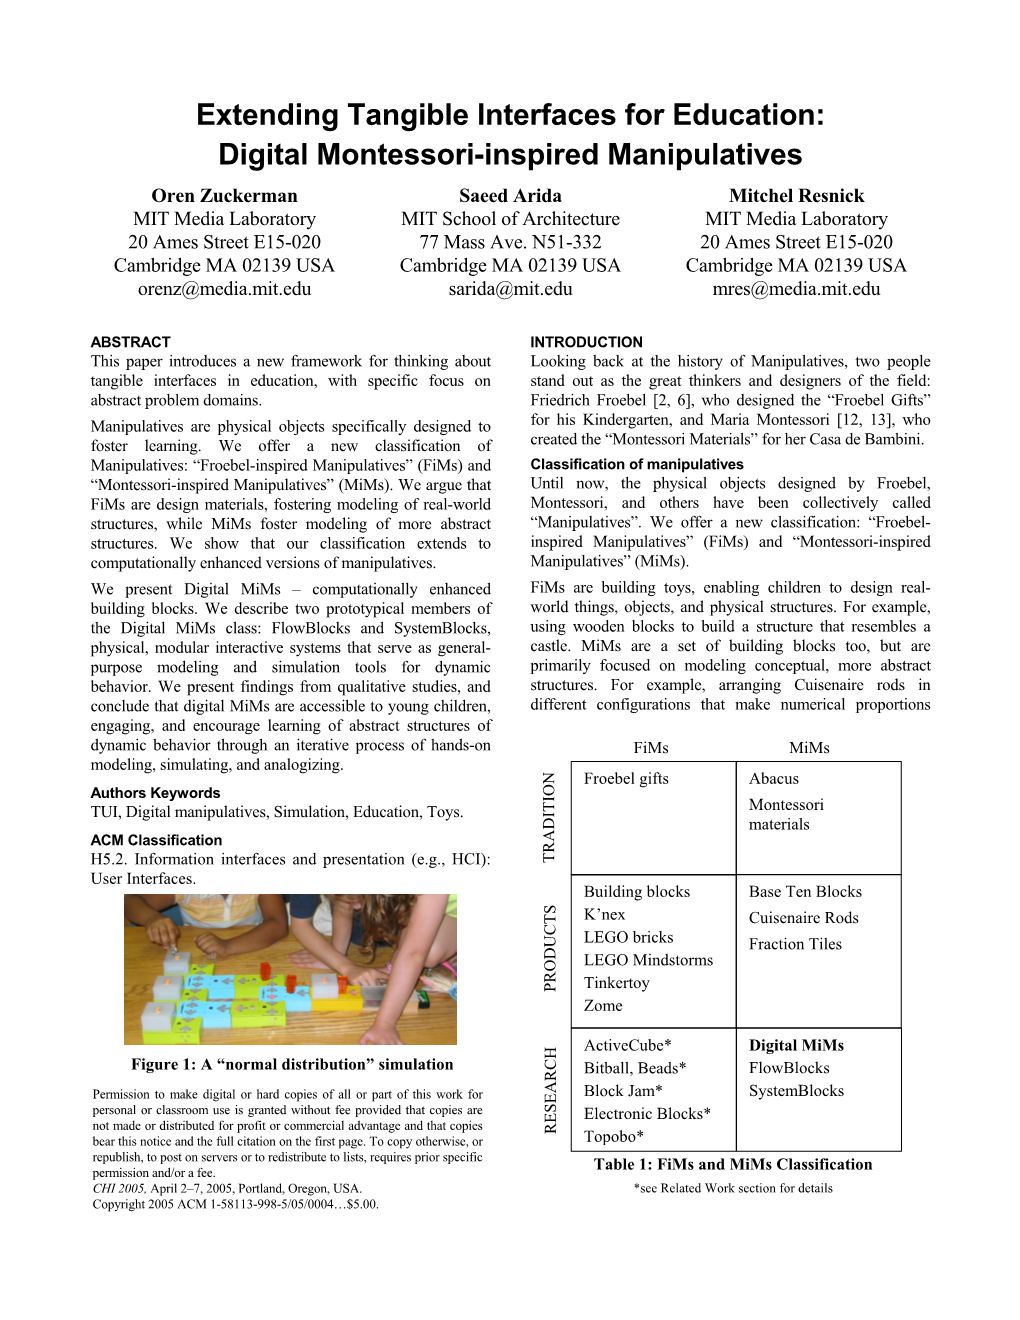 Extending Tangible Interfaces for Education: Digital Montessori-Inspired Manipulatives